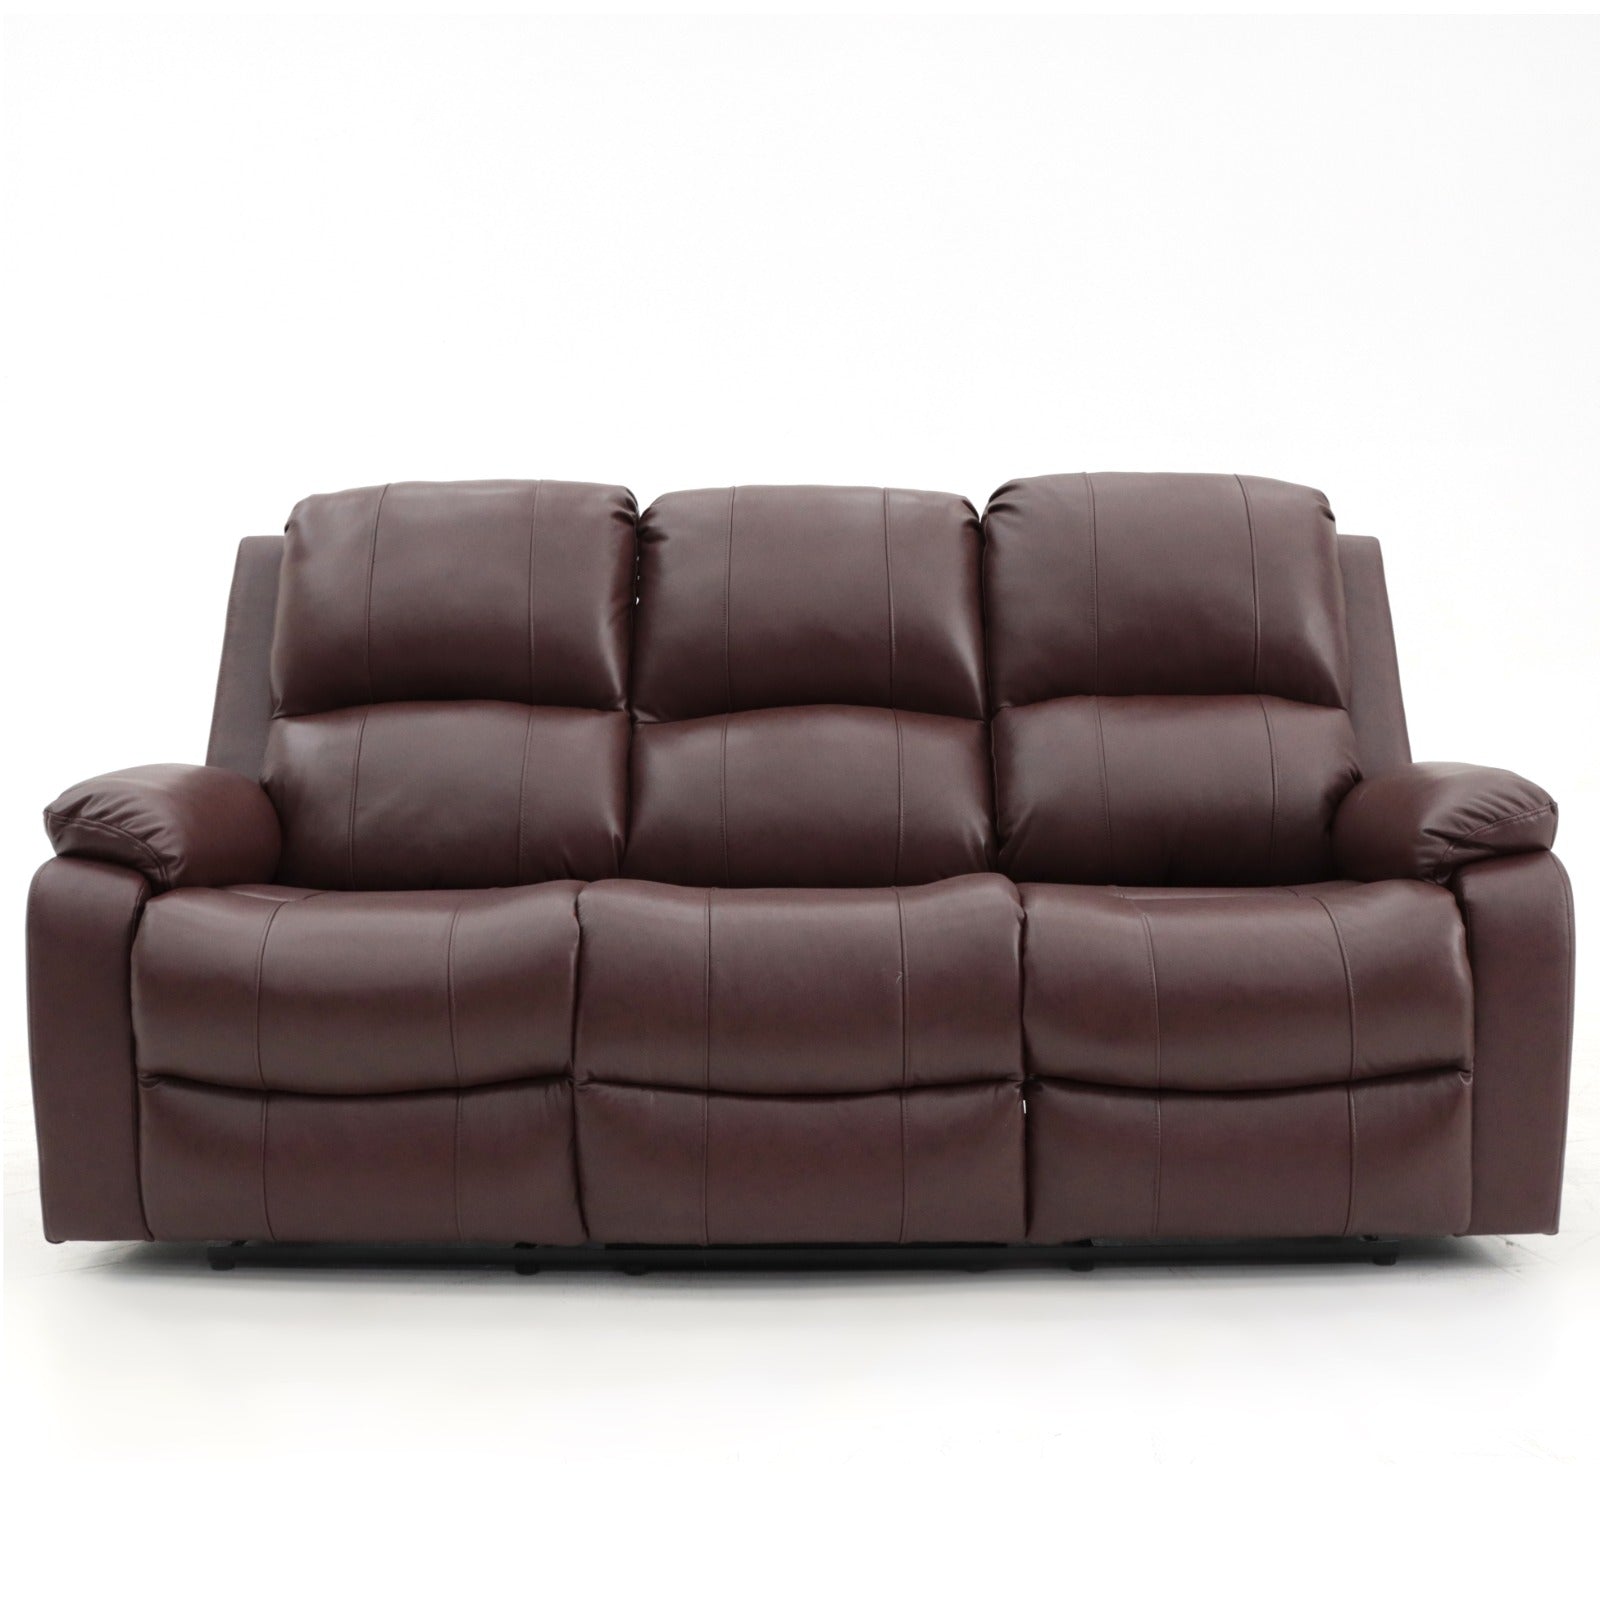 Aston 3 Seater and 2 Seater Manual Recliner Chestnut Leather